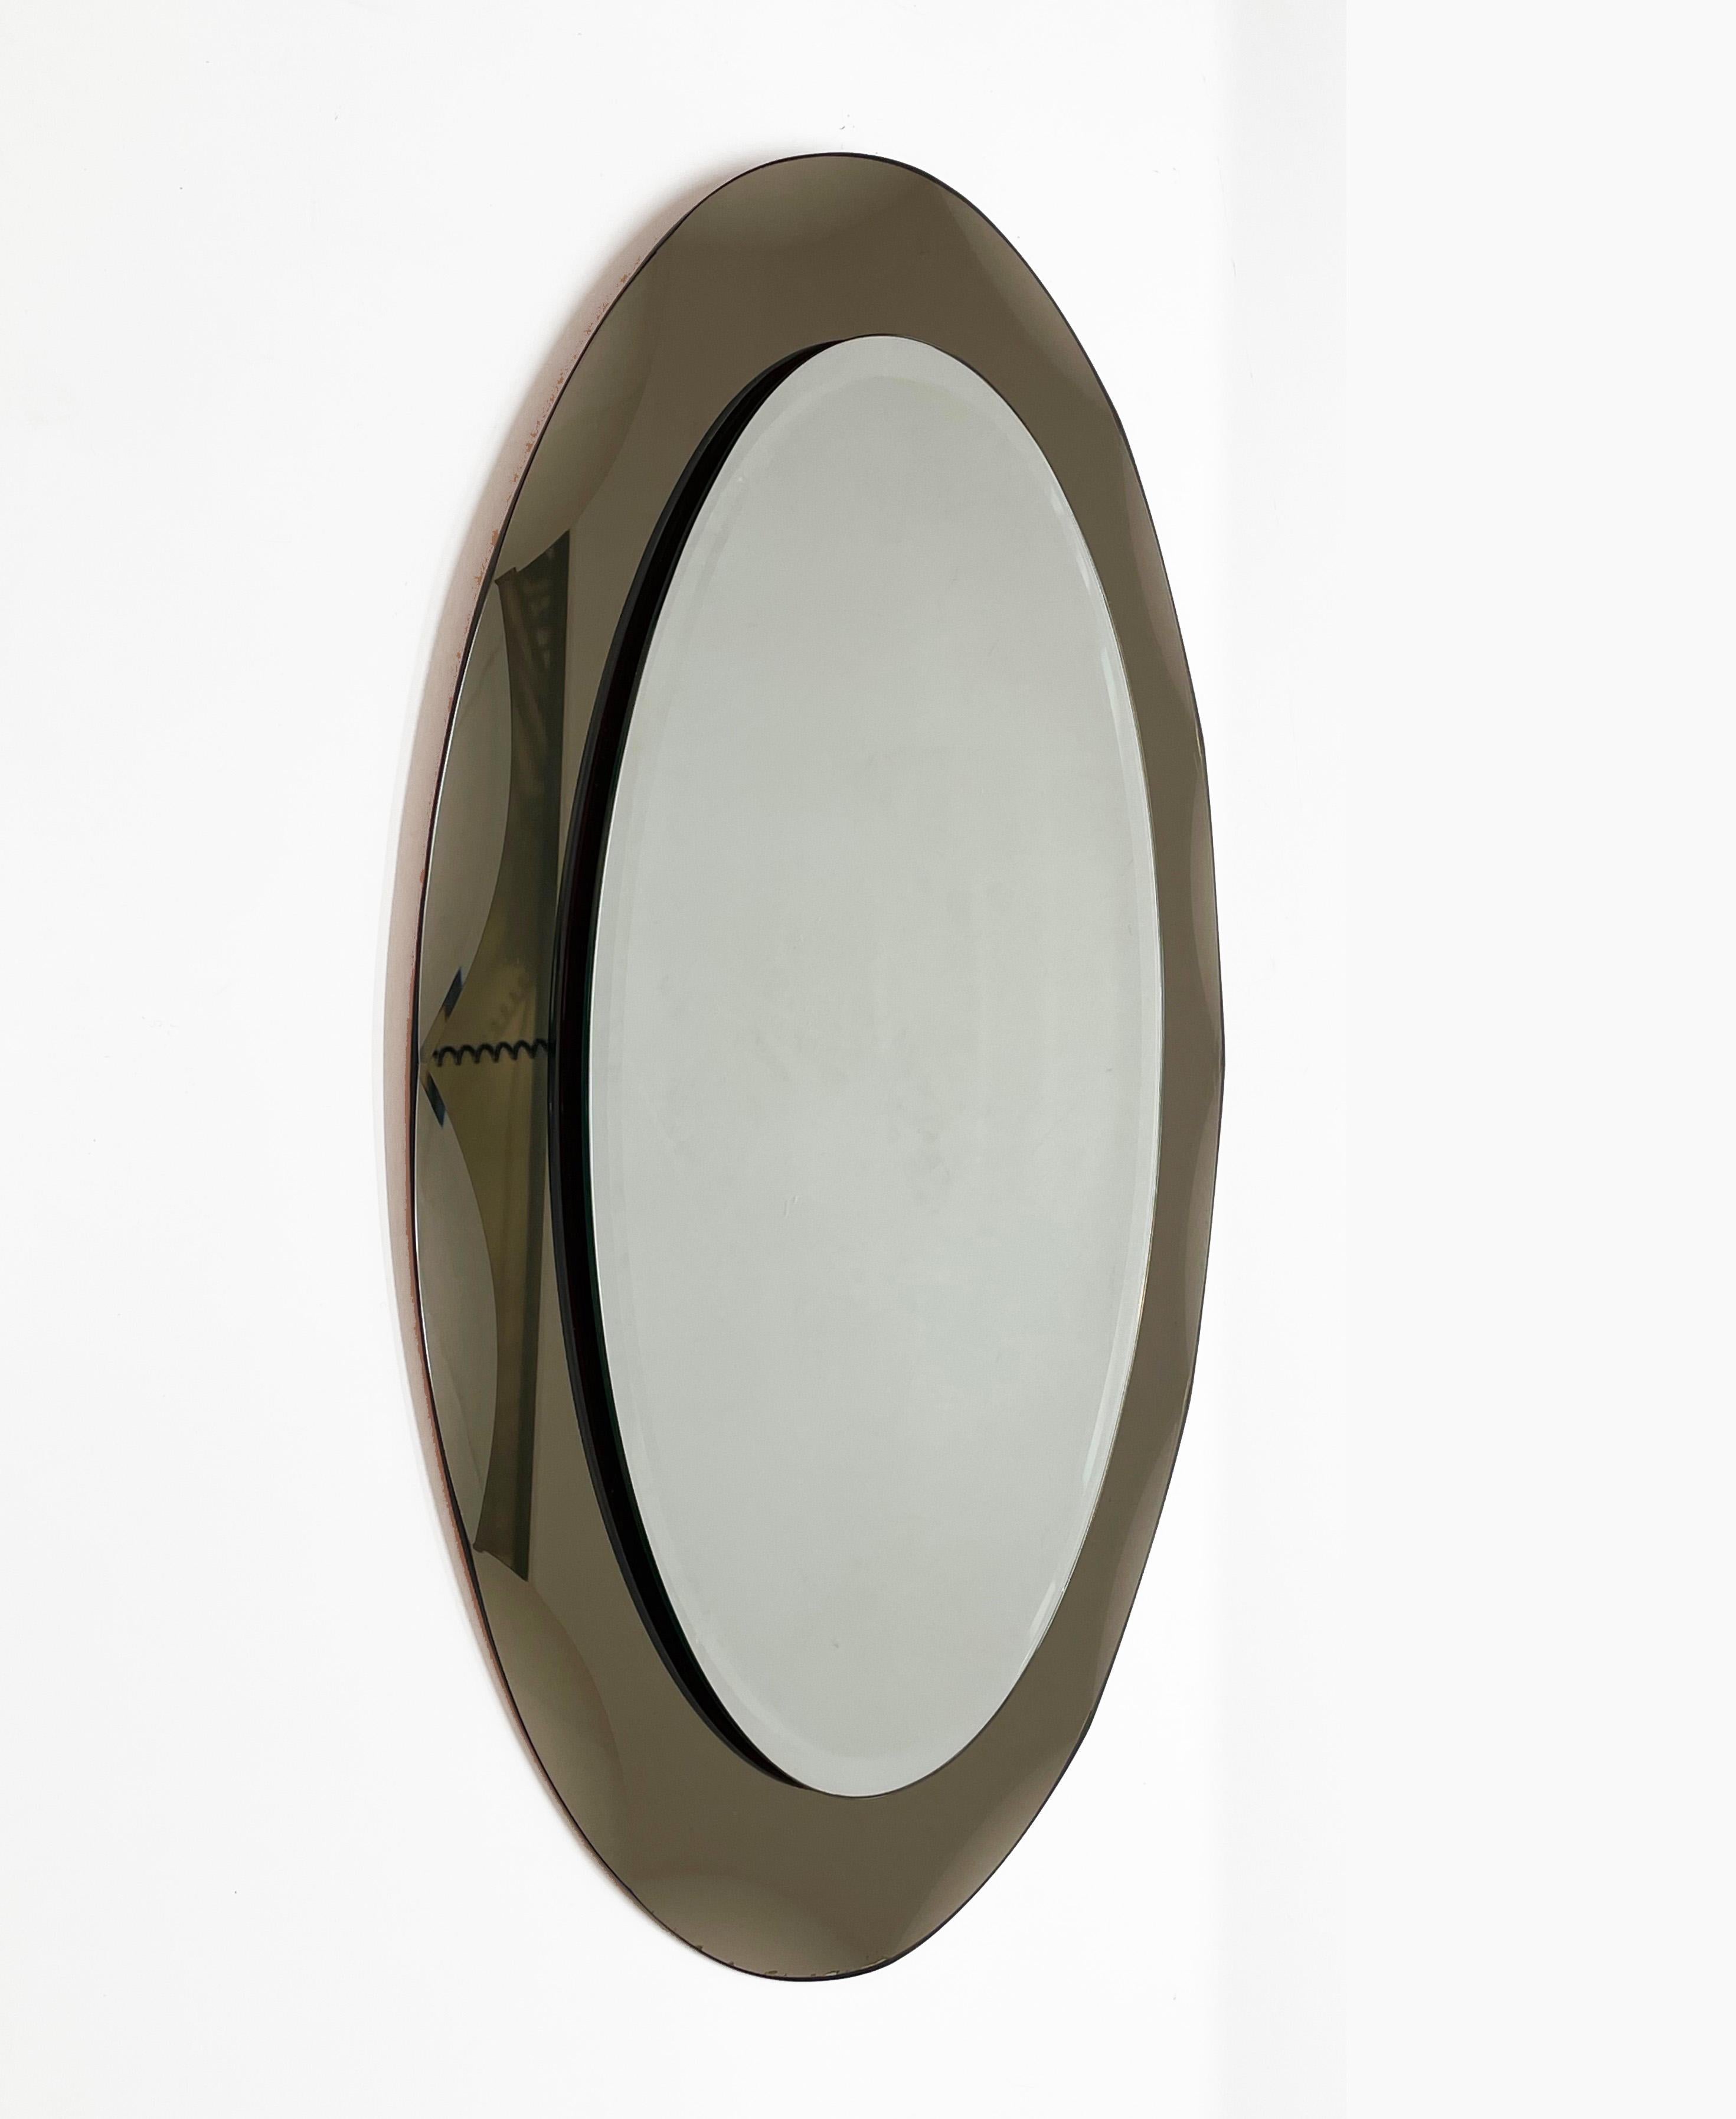 Beautiful midcentury oval mirror with bronzed graven frame. This mirror is in the style of Cristal Arte and was designed in Italy during the 1960s.

This piece is an example of excellent Italian manufacture with a double mirror layer. The external